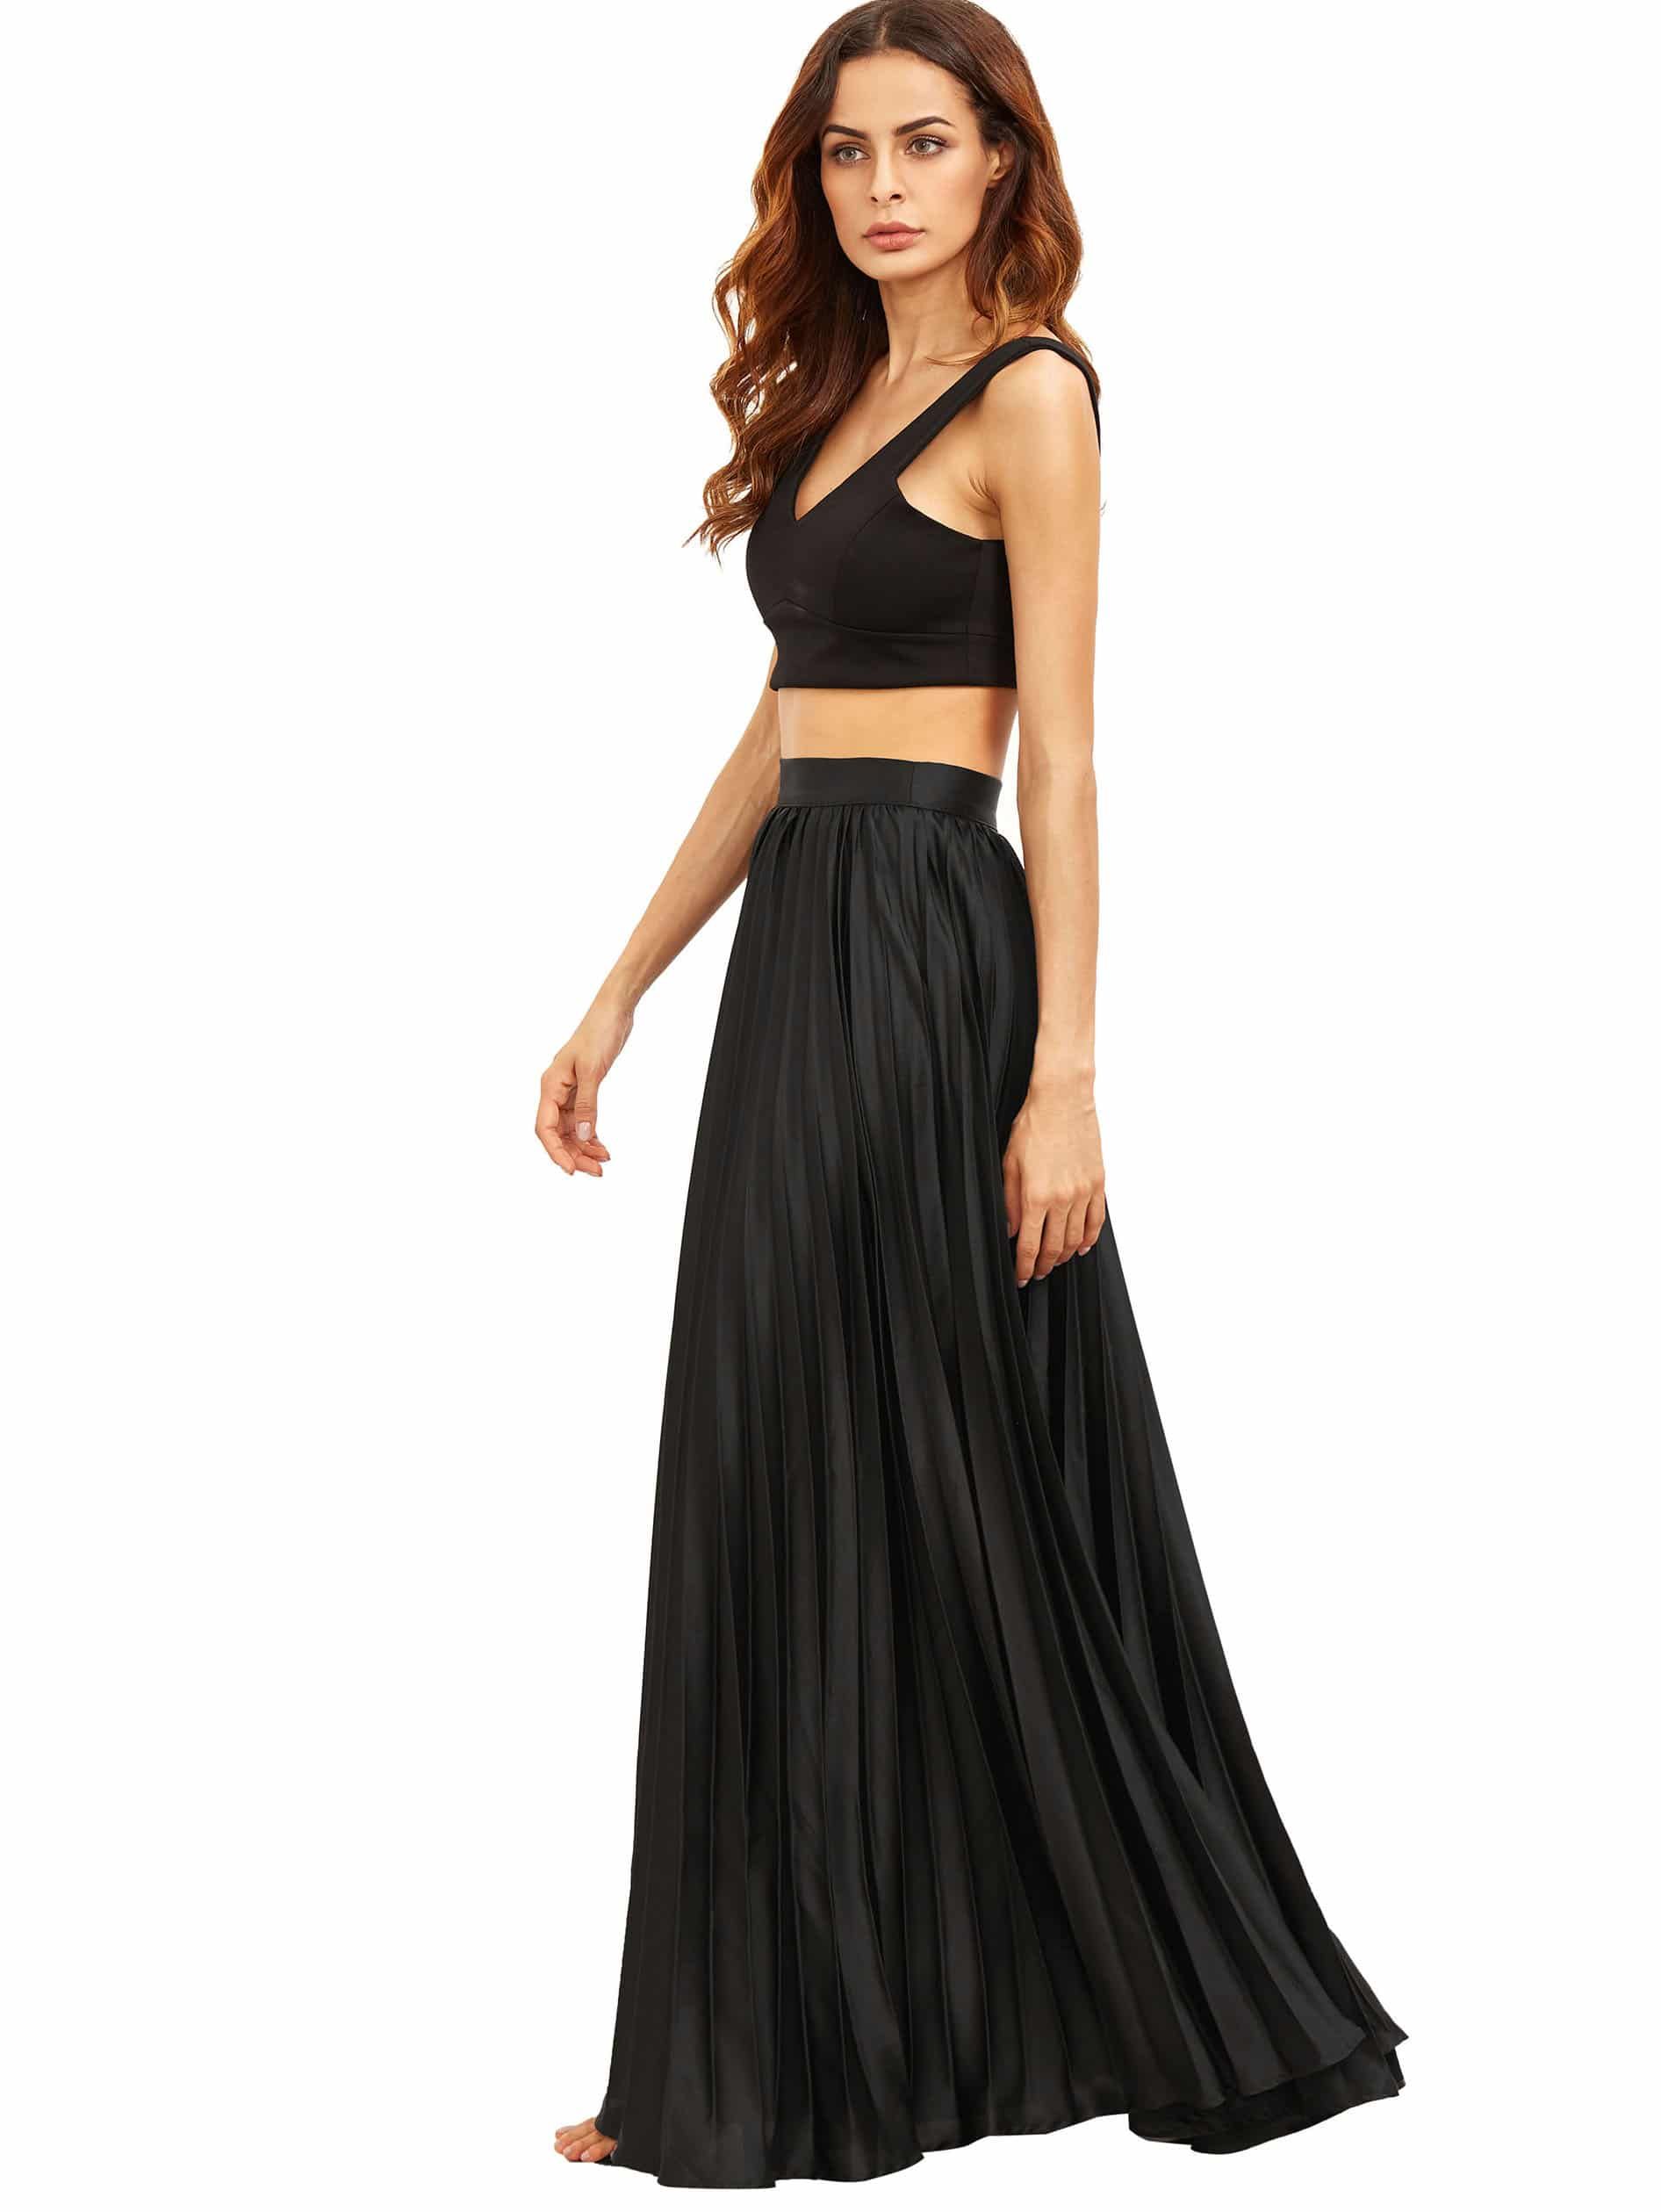 Pleated Flare Floor Length Skirt With Zipper Side | SHEIN